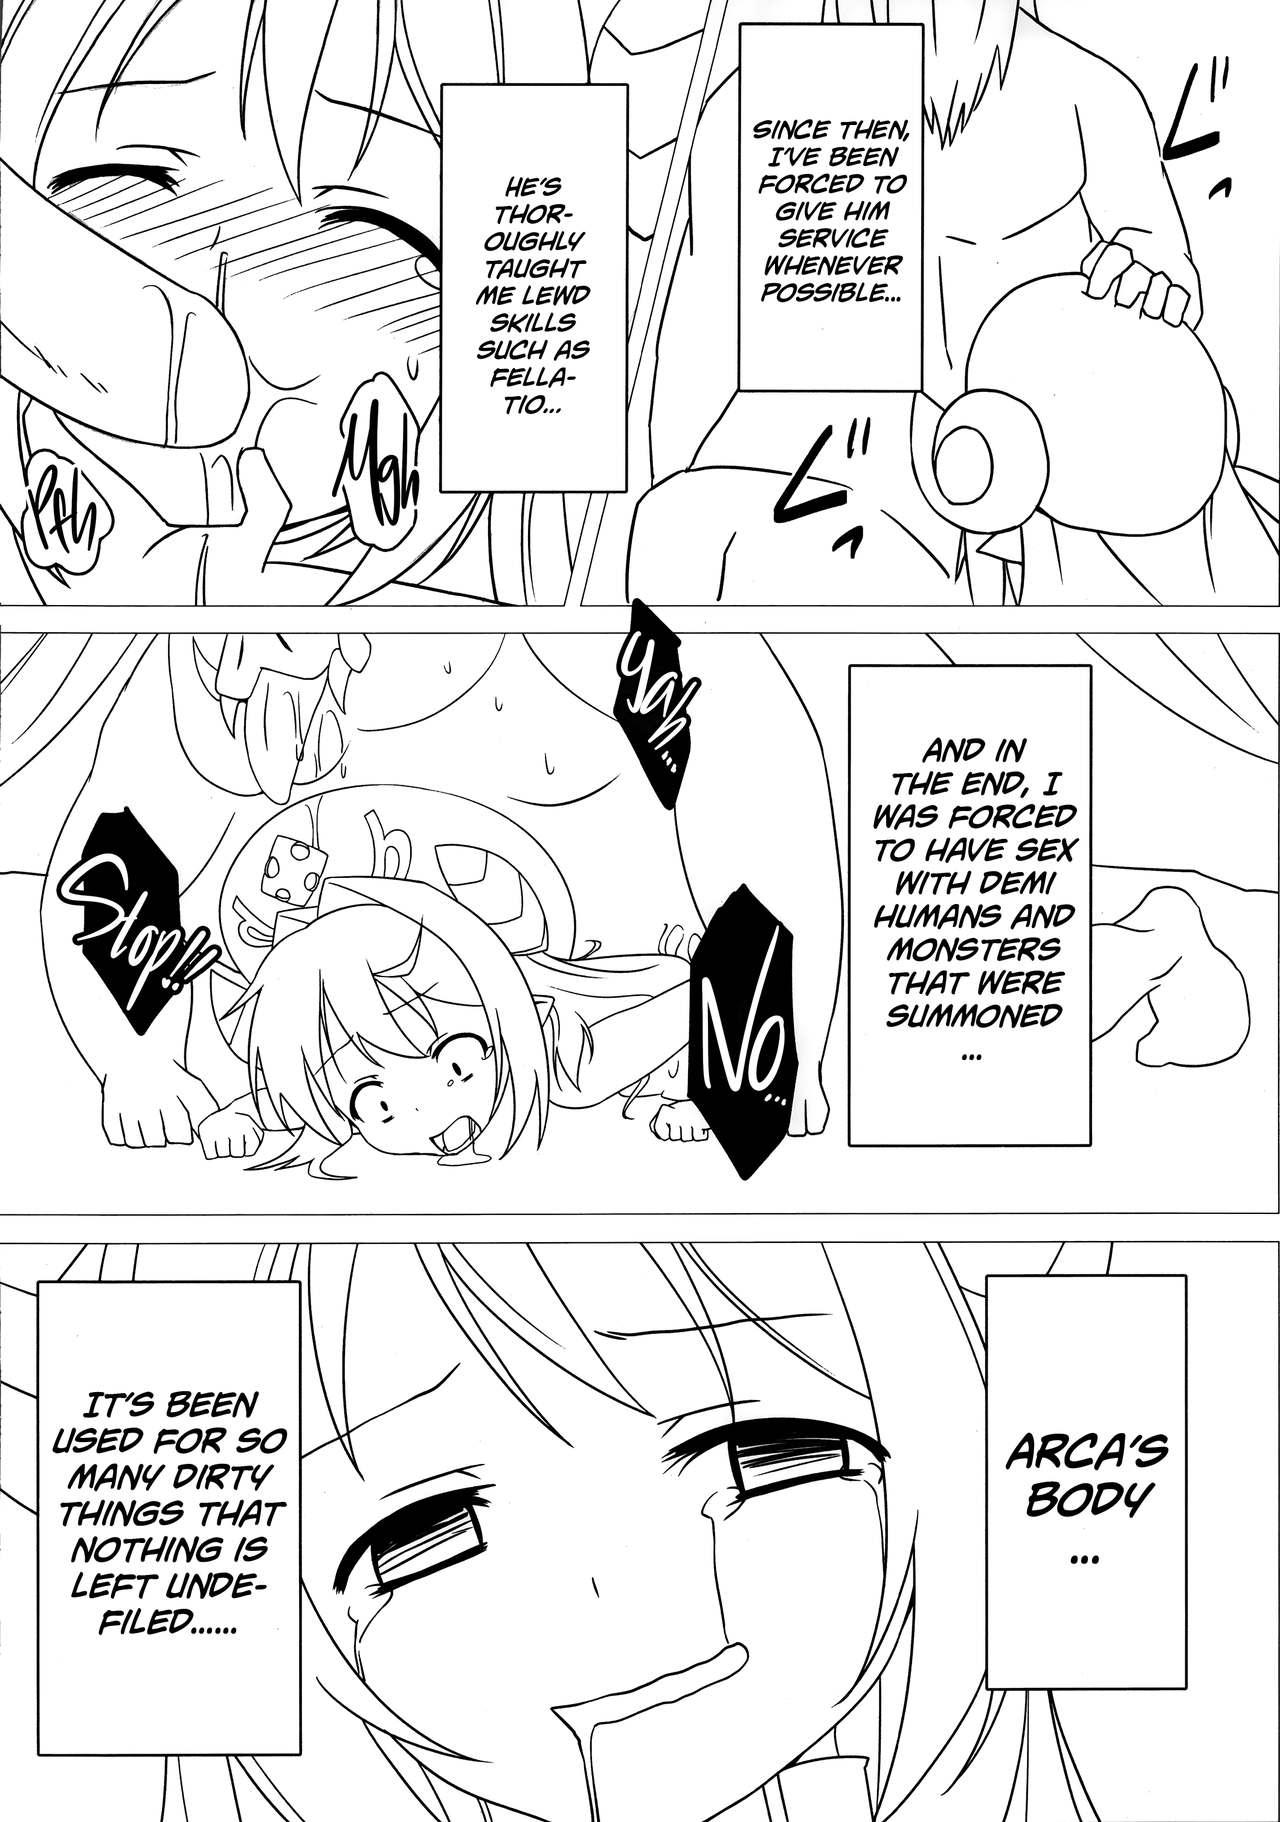 Oil Summoning Accident - Shinrabansho Tight Ass - Page 8